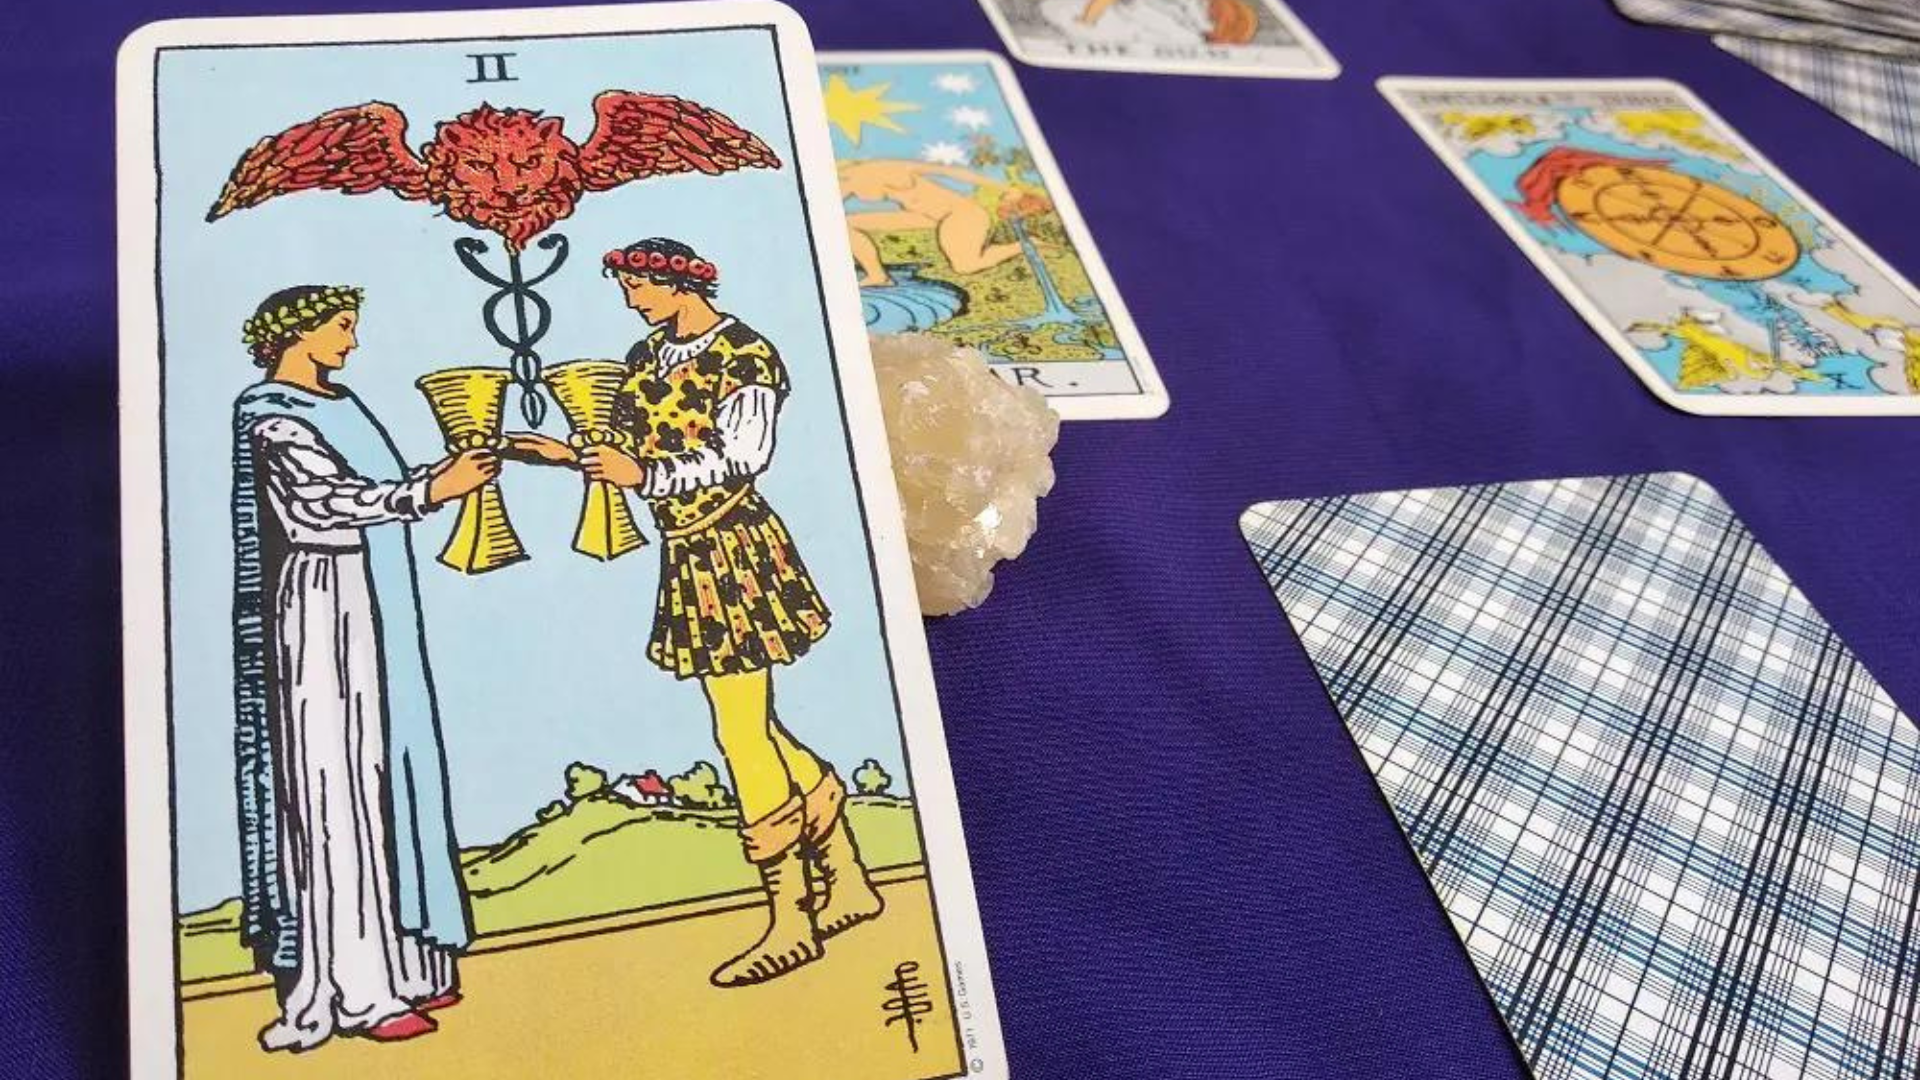 Two Of Cups Upright Card placed on a violet table along with other cards and a crystal